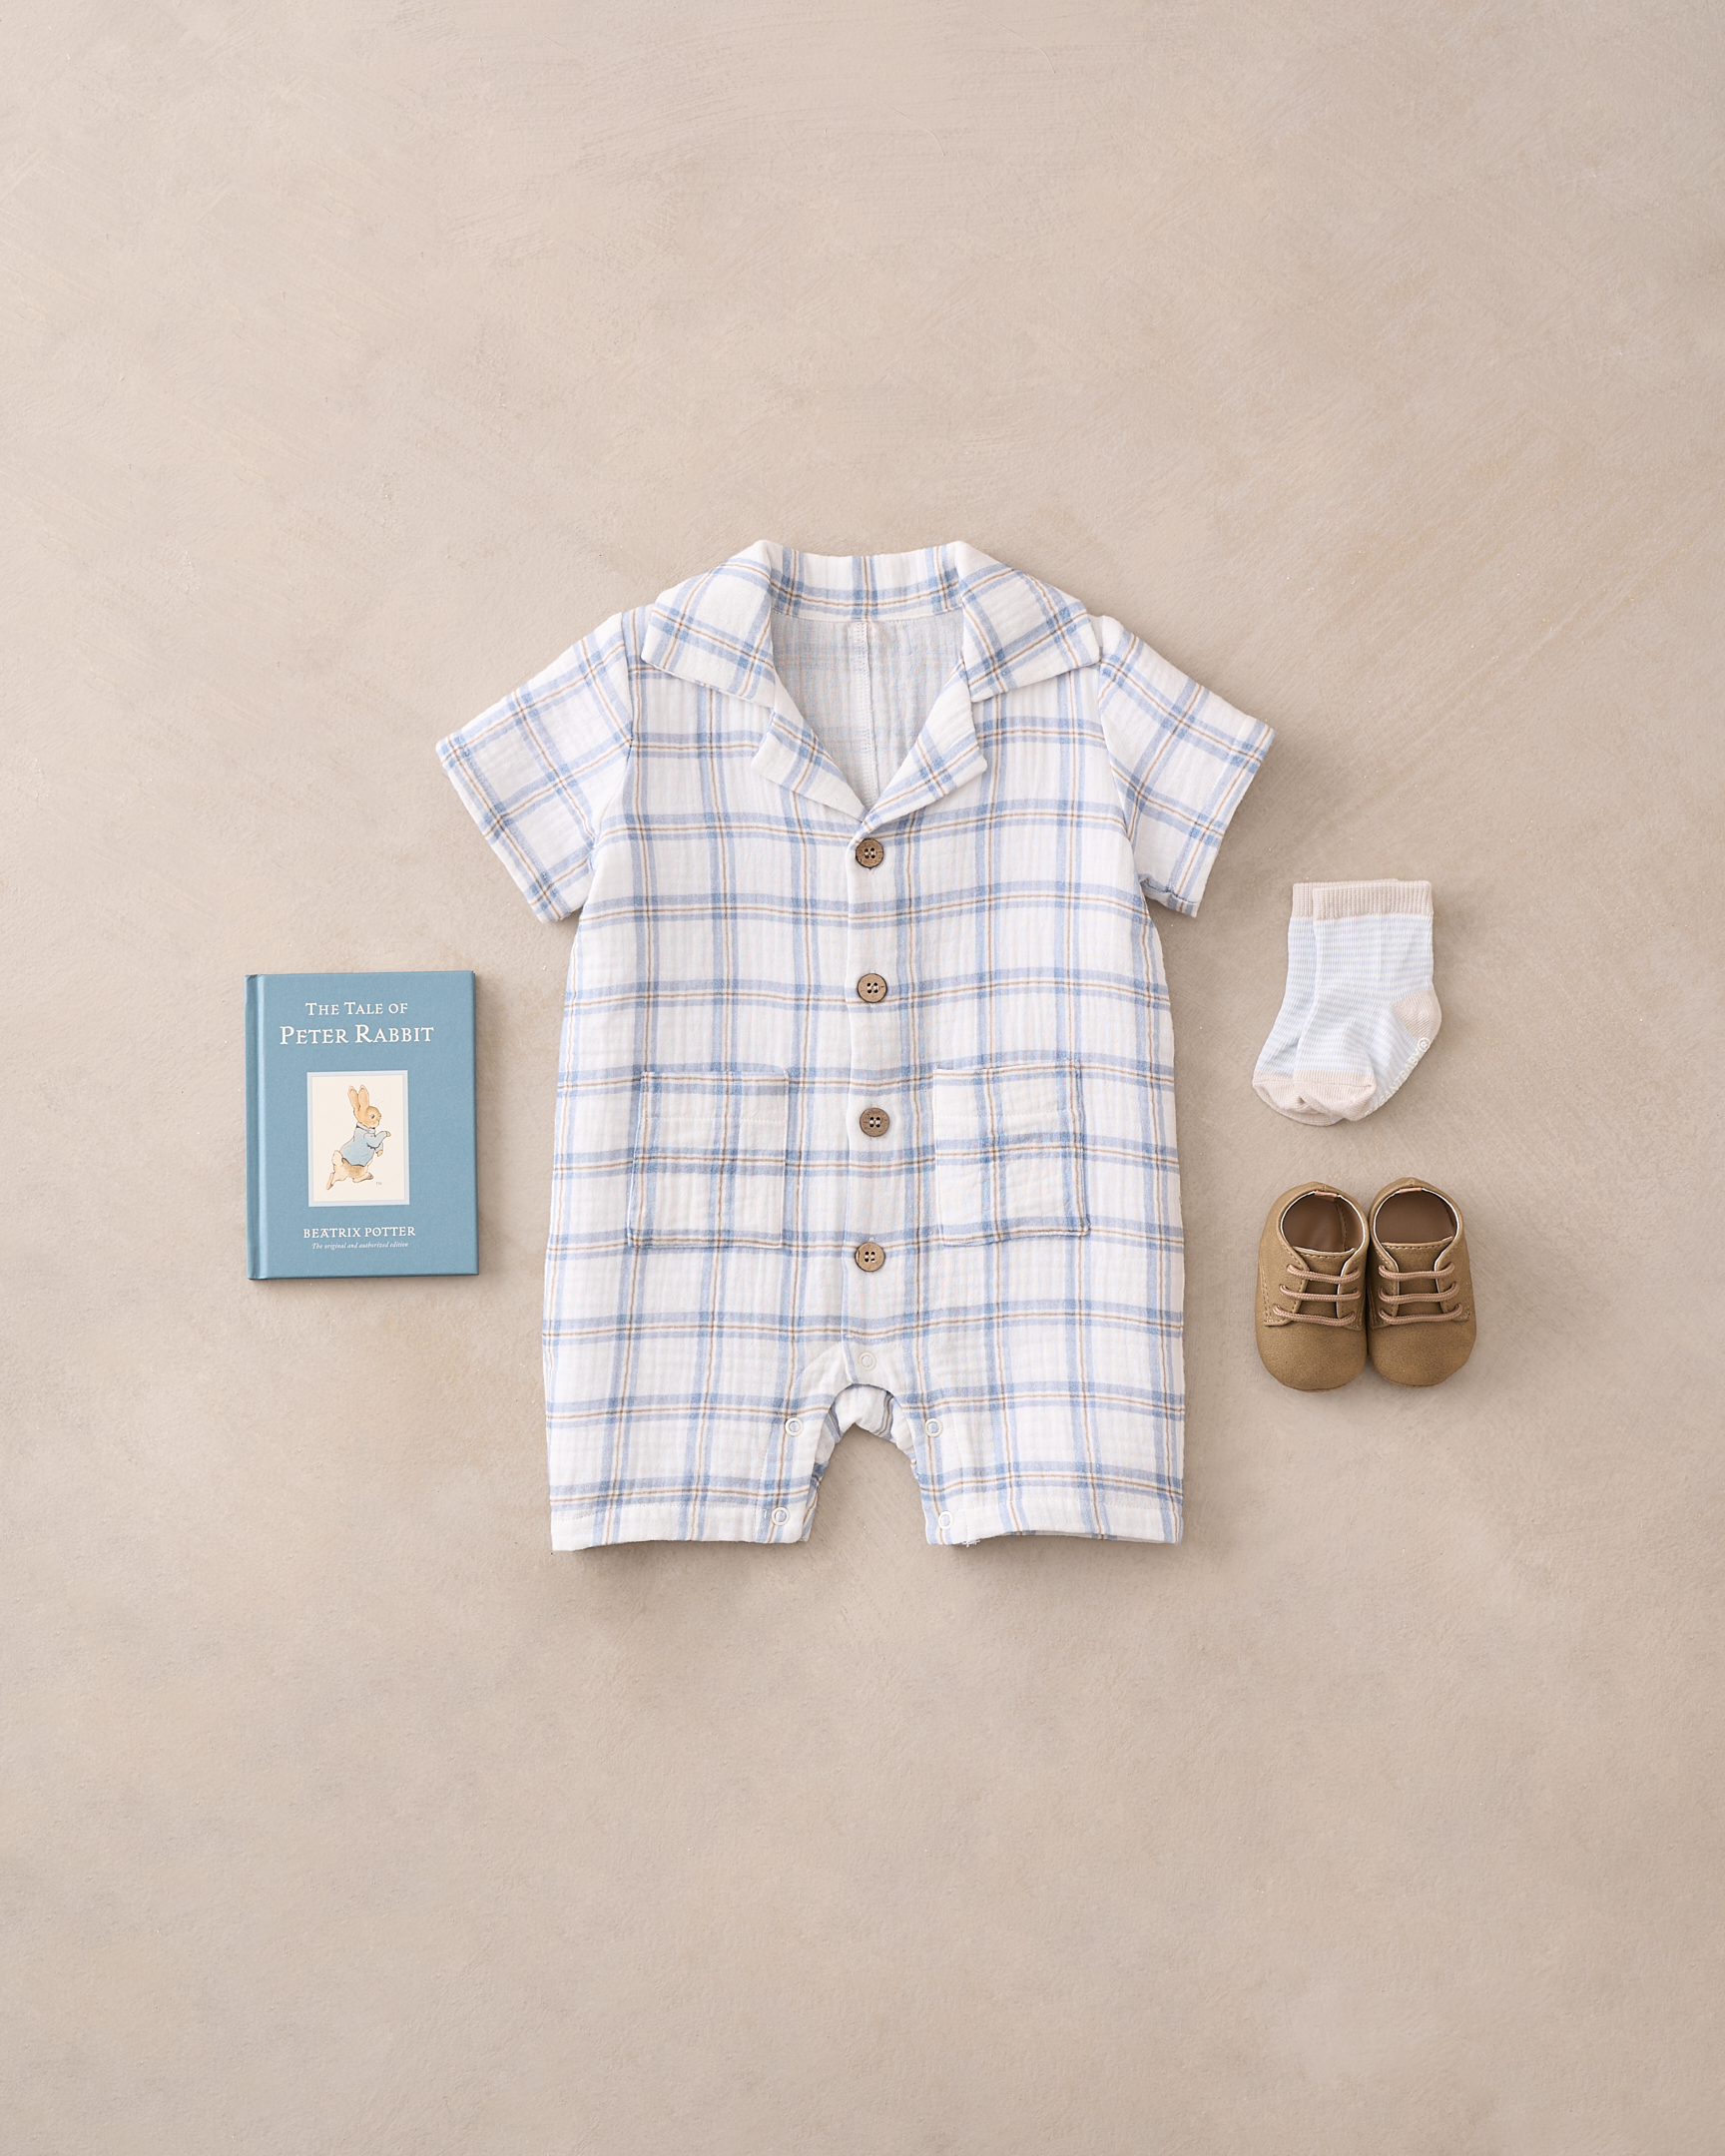 Luxury Baby Boy Clothes: Knit Sweaters, Cardigans – Elegant Baby